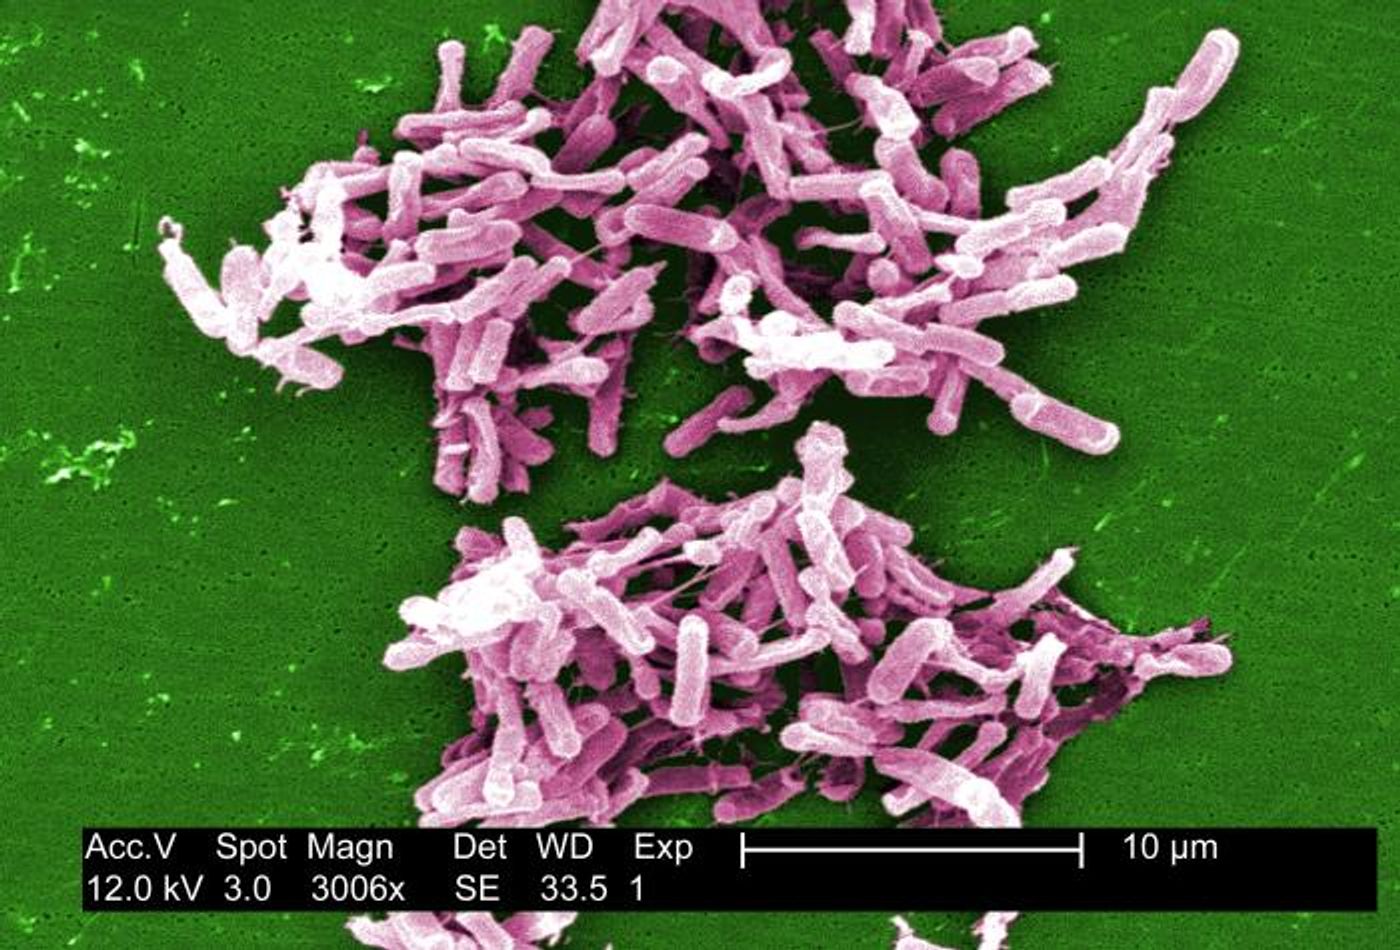 A digitally-colorized scanning electron microscopic image depicting a group of Clostridium difficile bacteria, cultured from a stool sample after an outbreak. / Credit: CDC/ Lois S. Wiggs